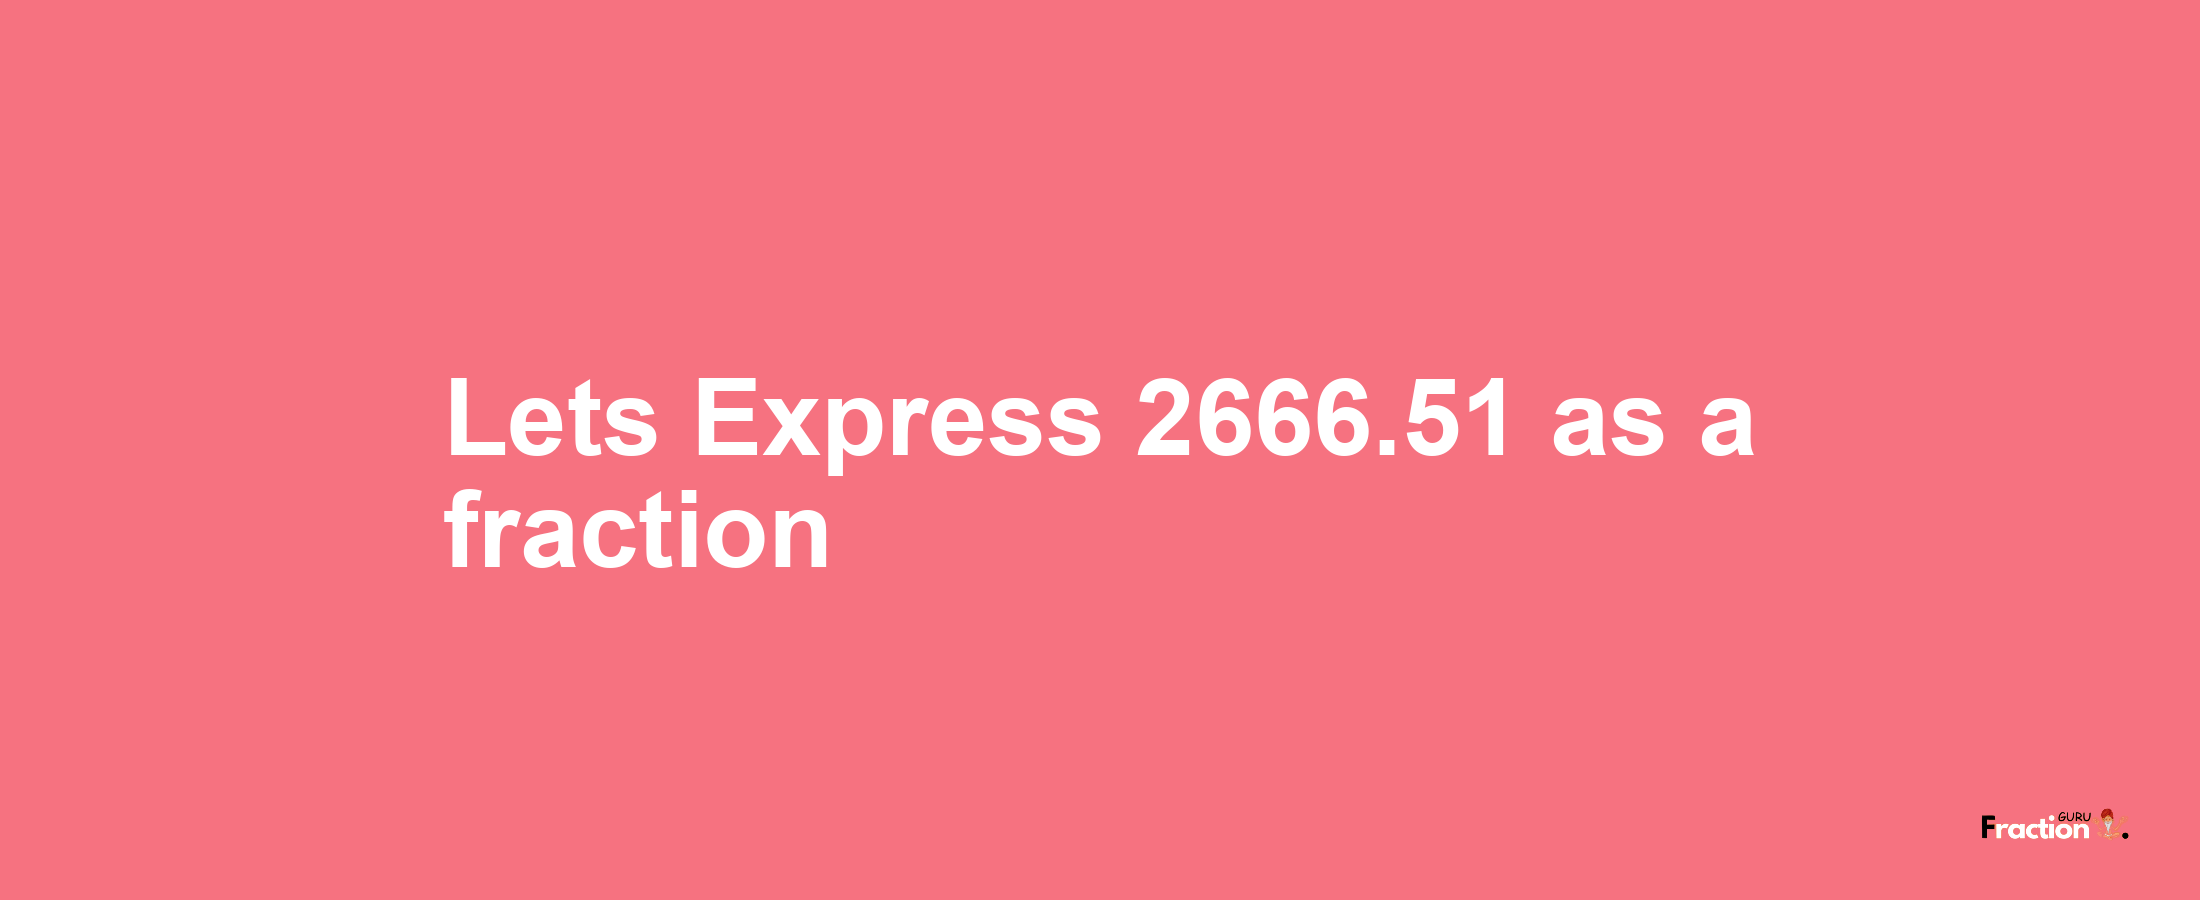 Lets Express 2666.51 as afraction